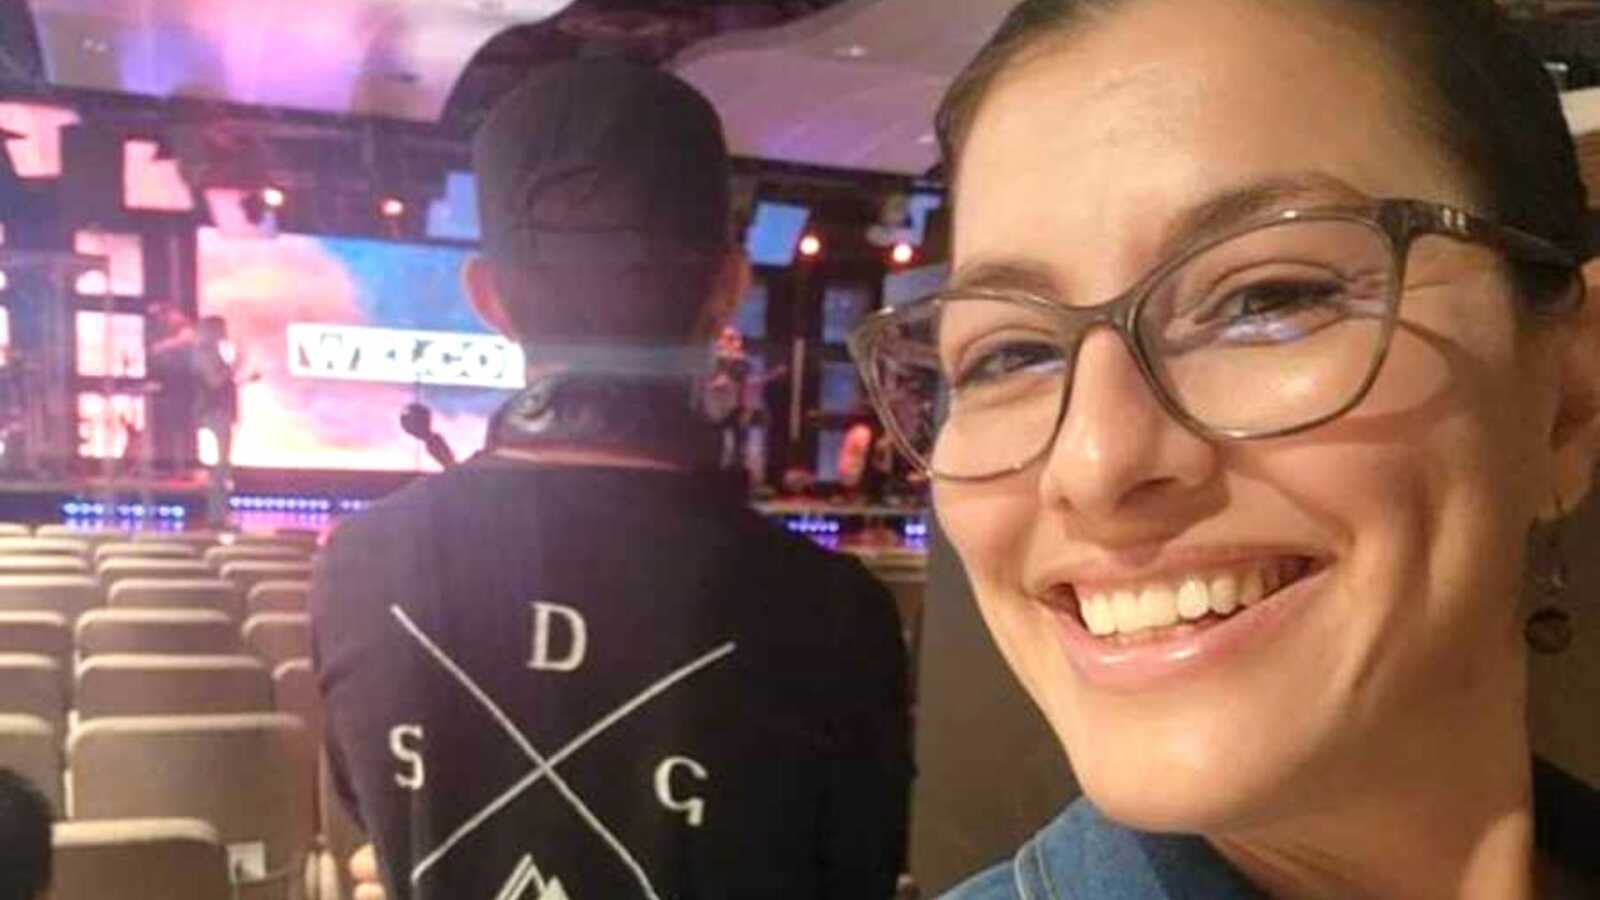 Mom smiling in selfie with teen son's back